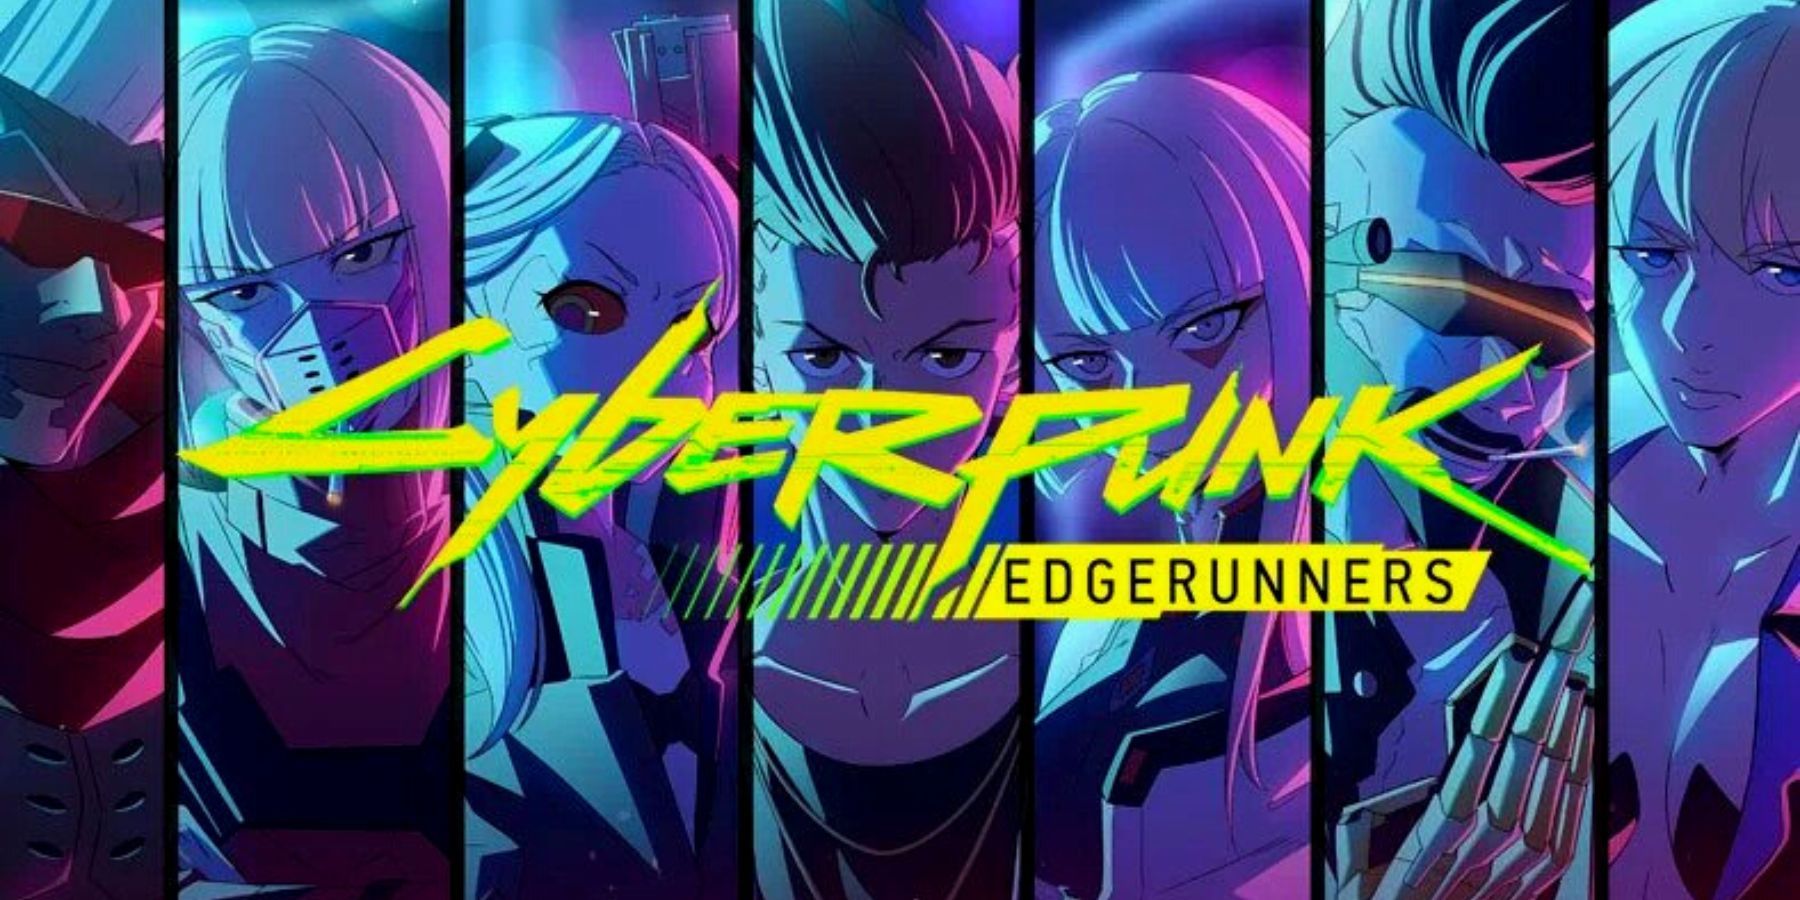 How Old Are the Characters in Cyberpunk: Edgerunners?